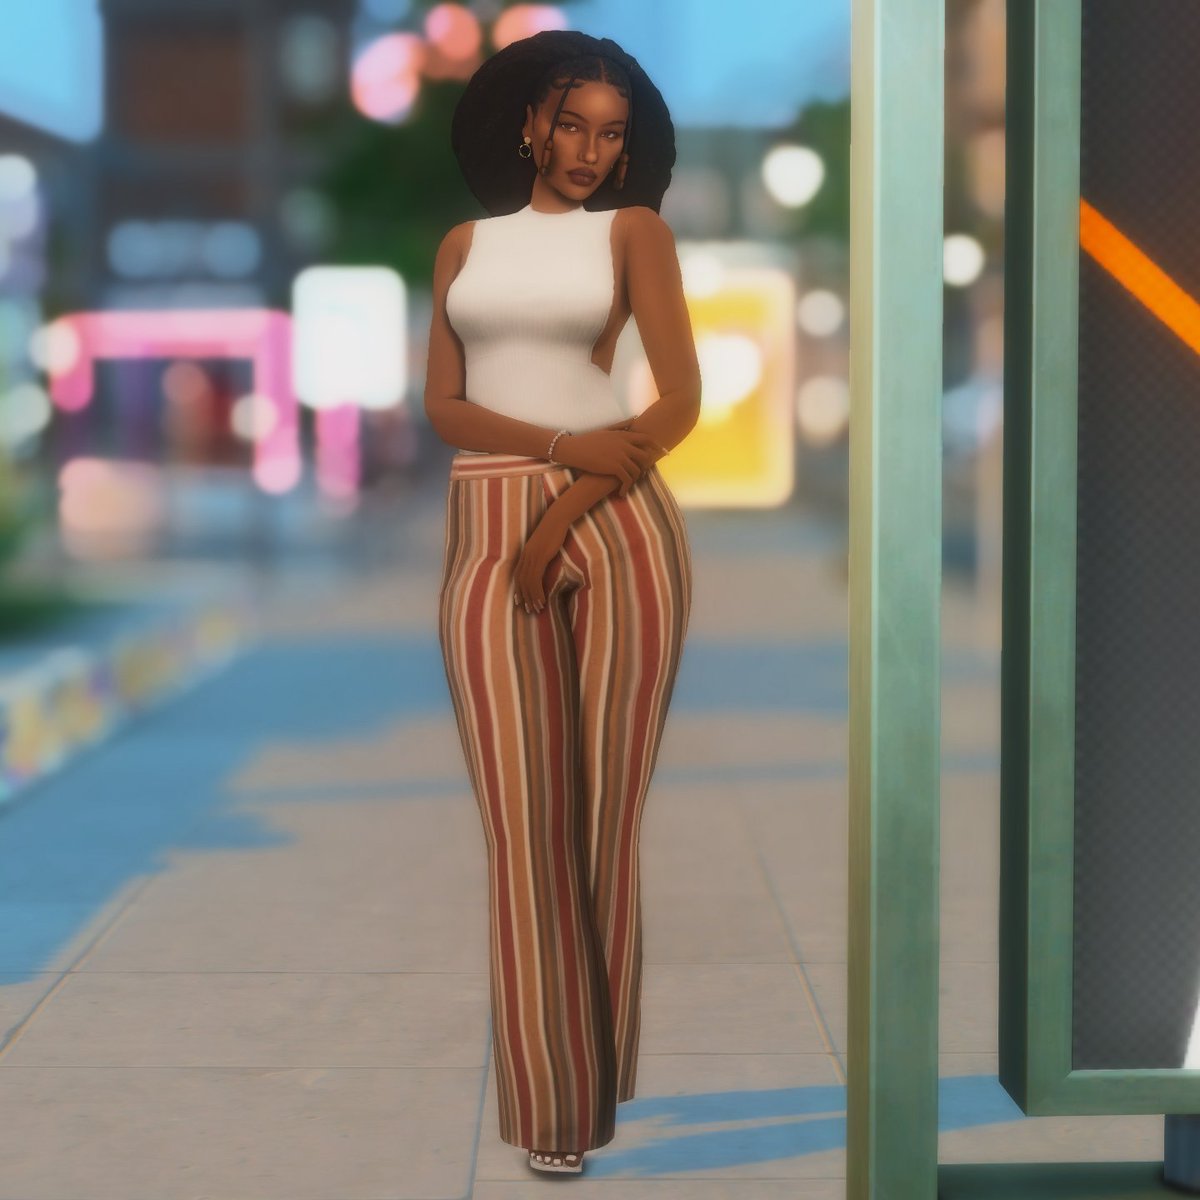 She came out sooo pretty 🥹🤩🤩
#ShowUsYourSims #TheSims4